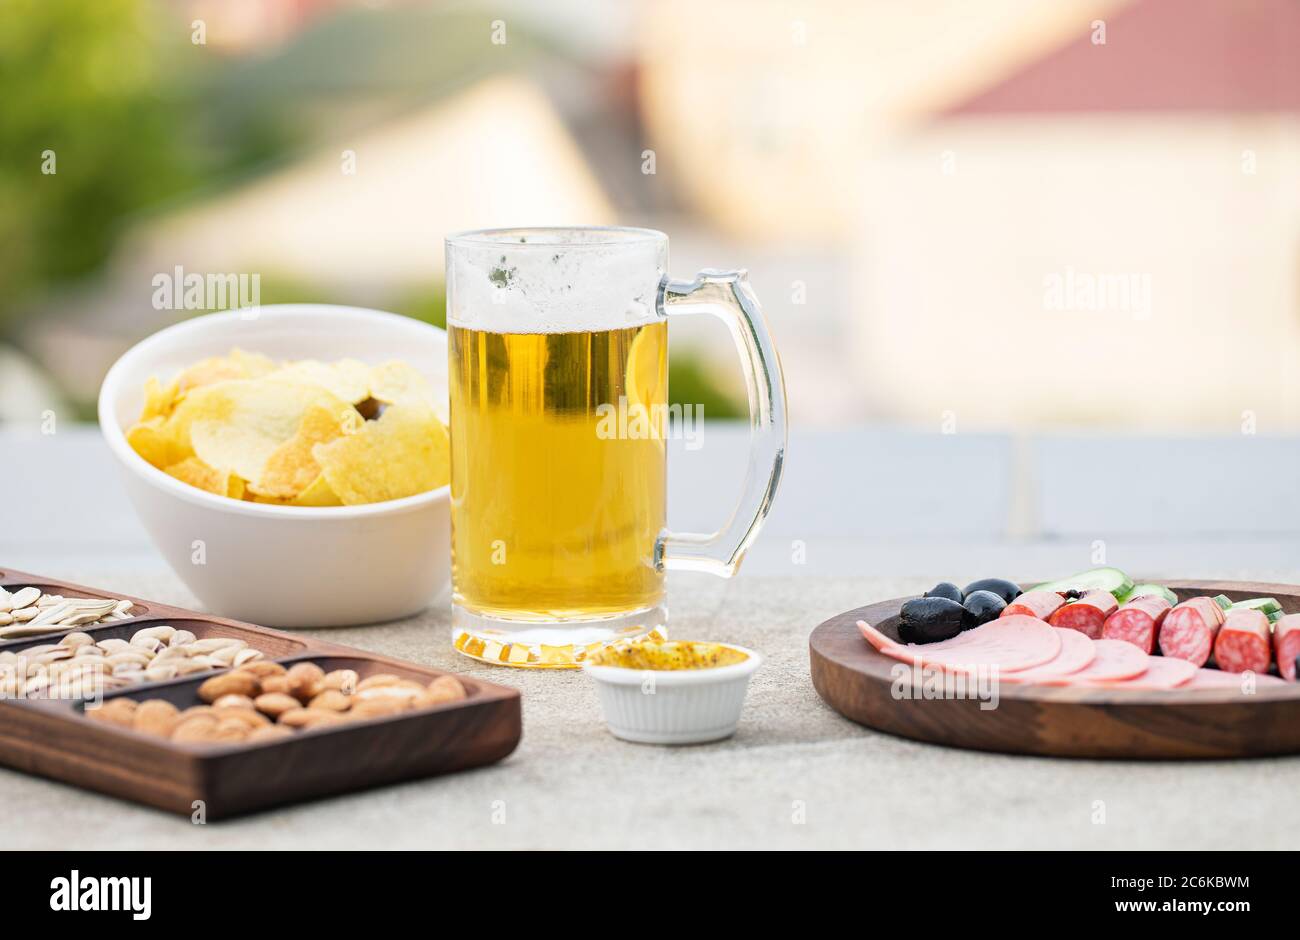 Sausage salad with snacks and beer Stock Photo